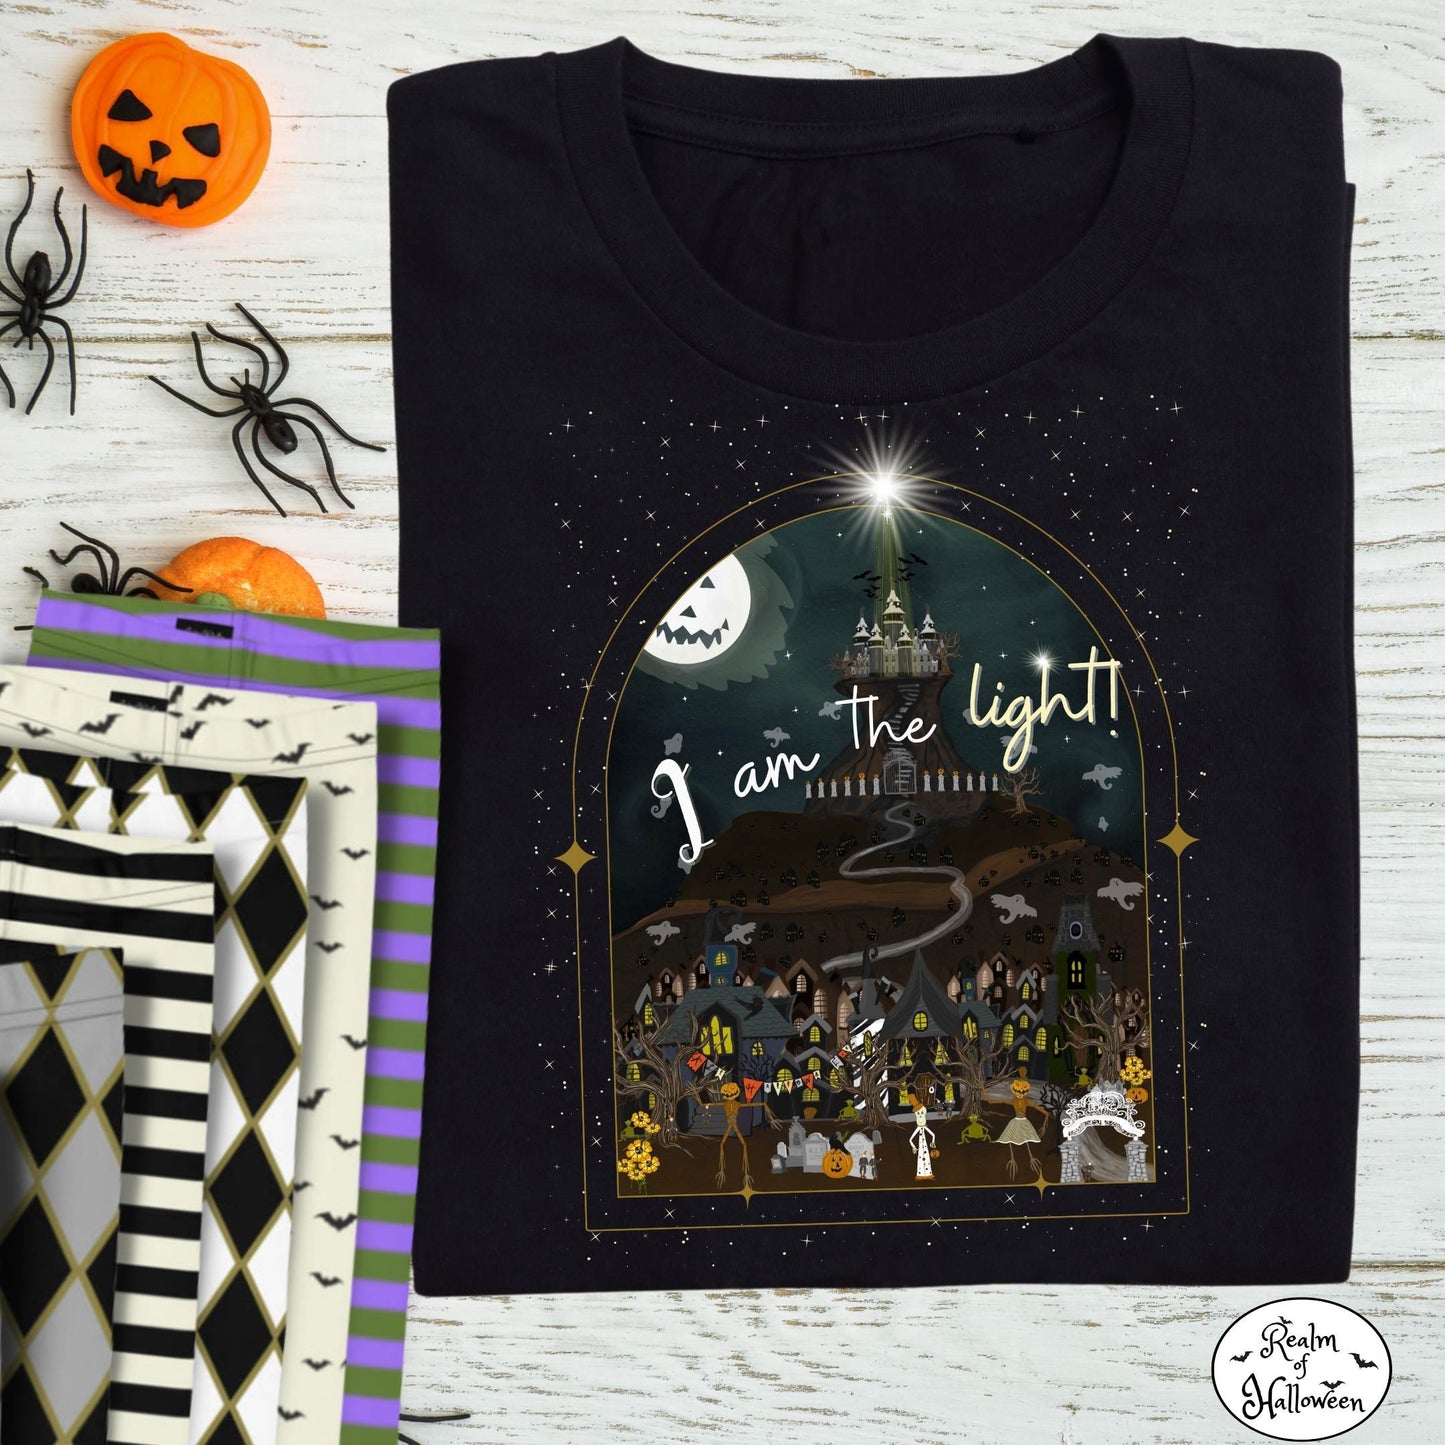 “I am the light” Graphic Black YOUTH SIZE T-Shirt, from the You are the Light Collection